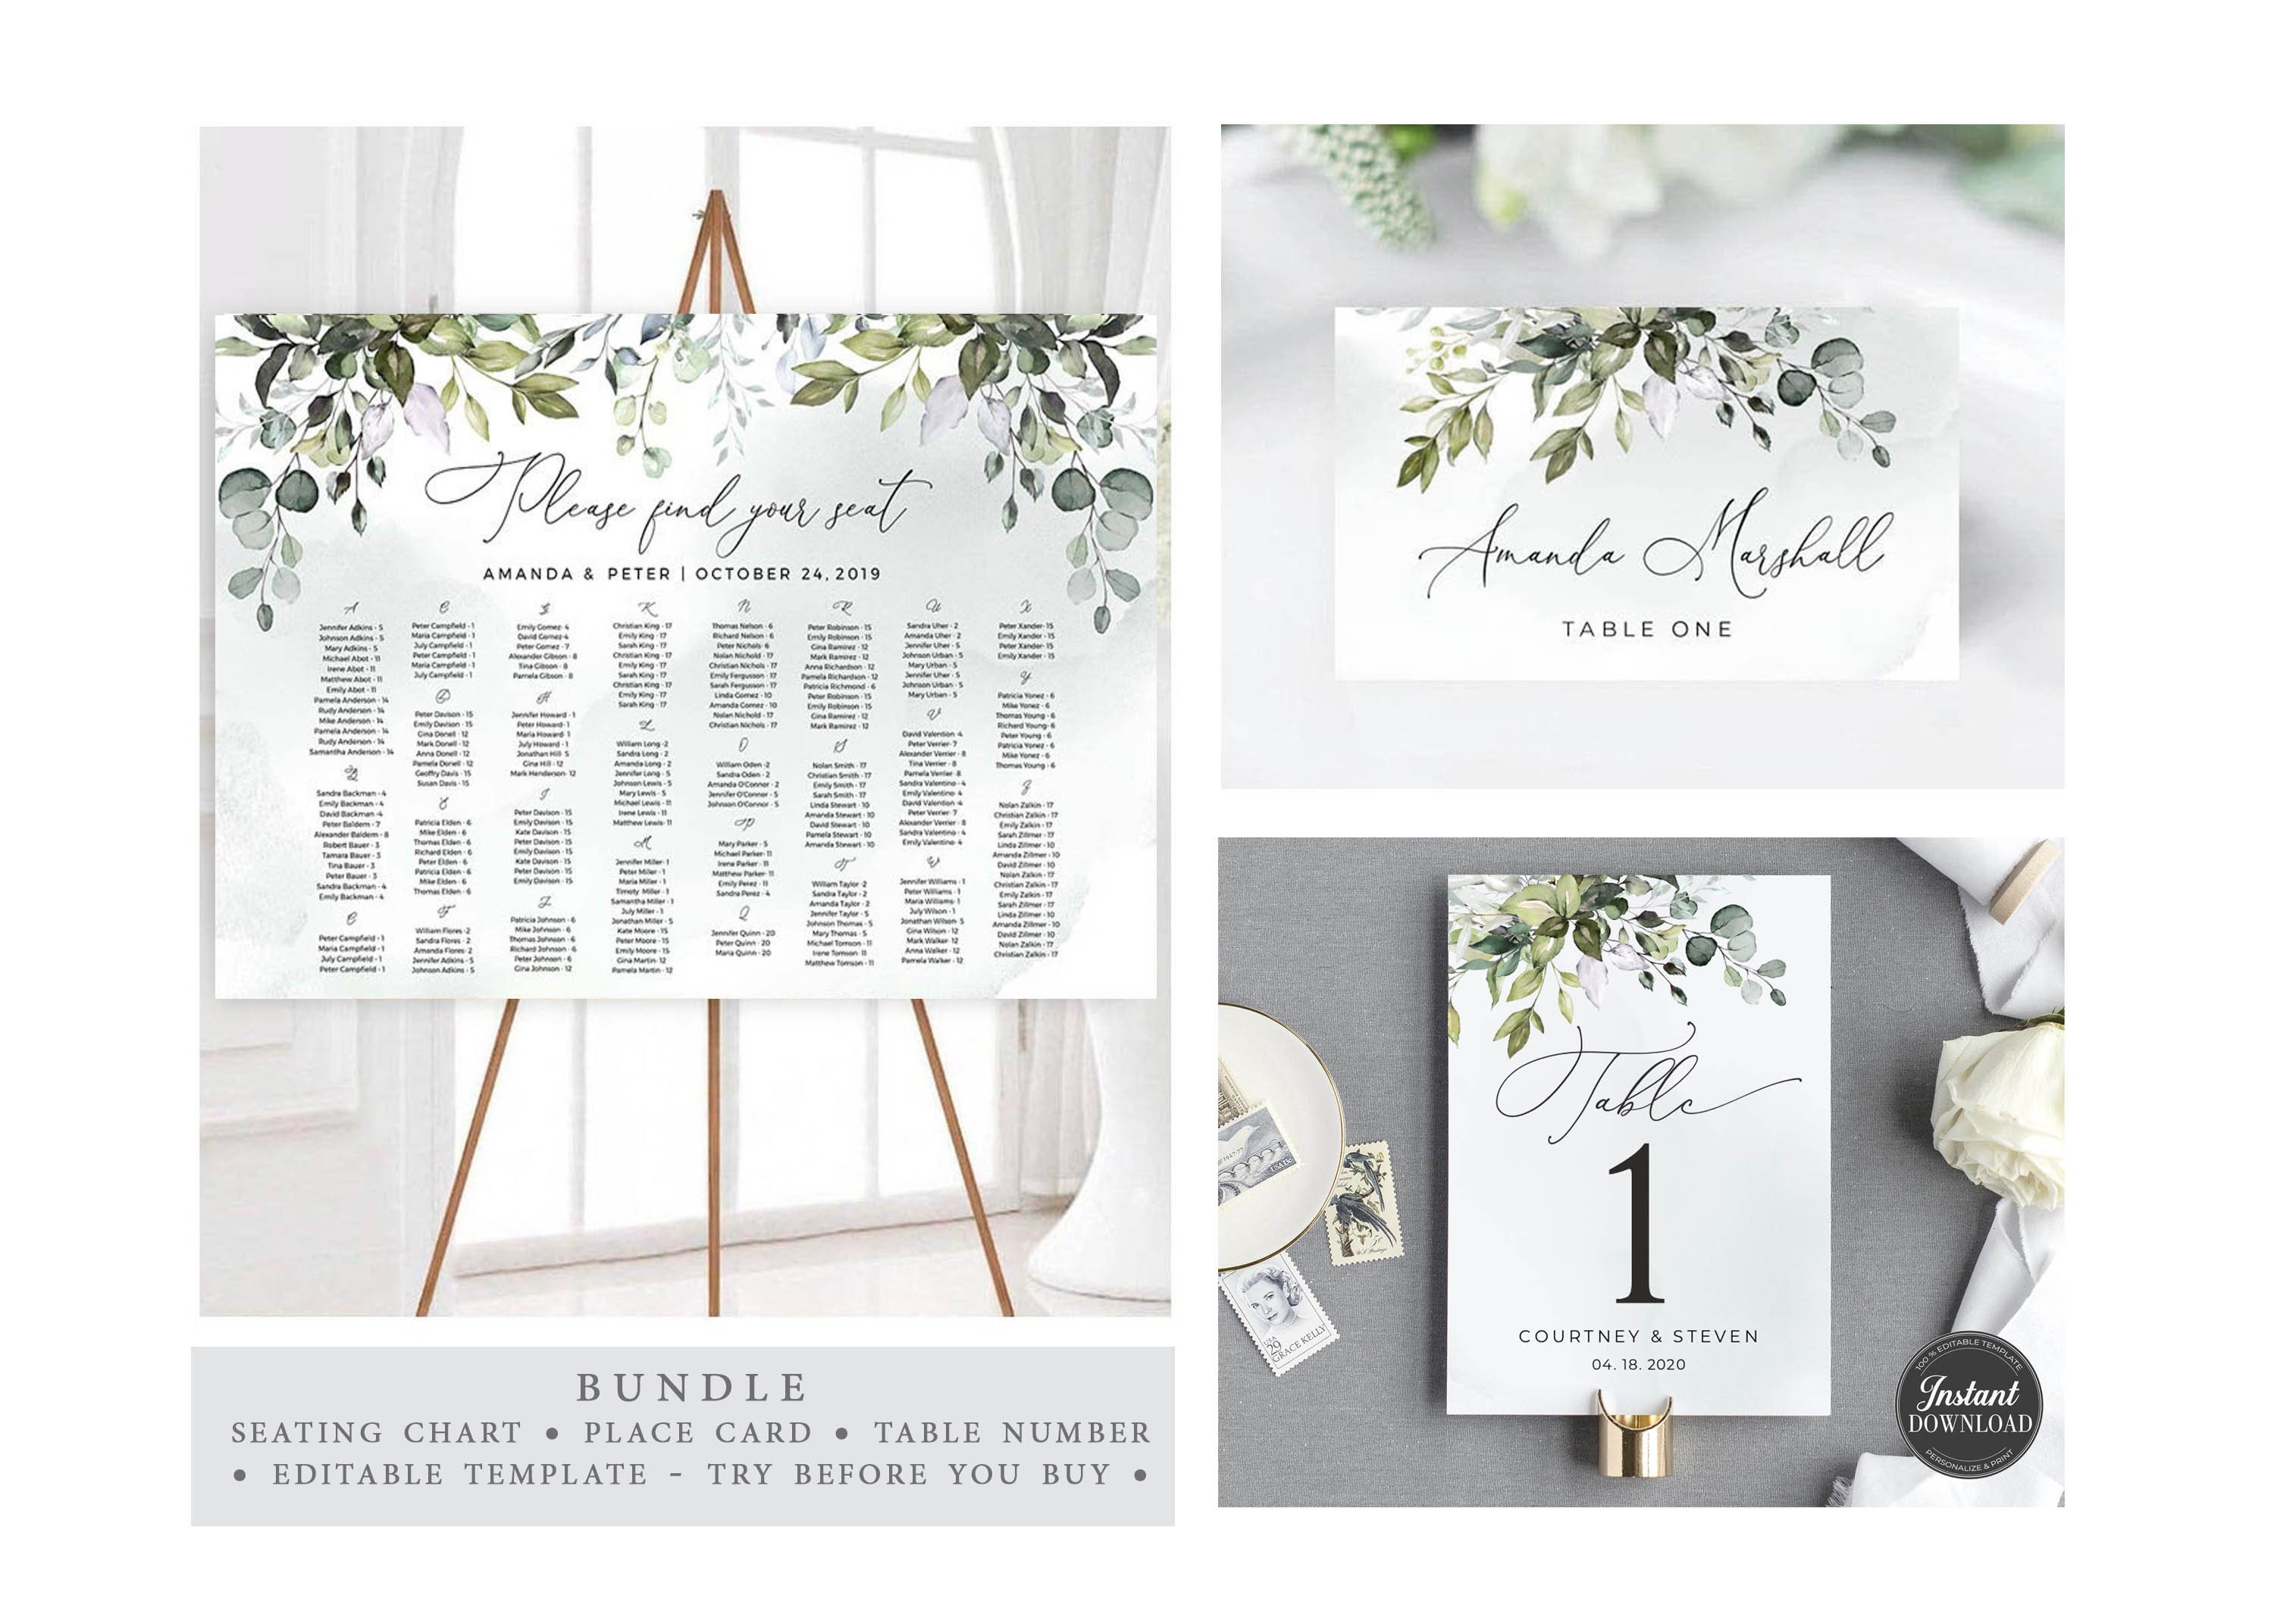 Bundle Alphabetical Seating Chart, Place Card, Table Number, Set of 3,  Editable Templates, Elegant Seating Chart Board, Templett BW1 -  Norway